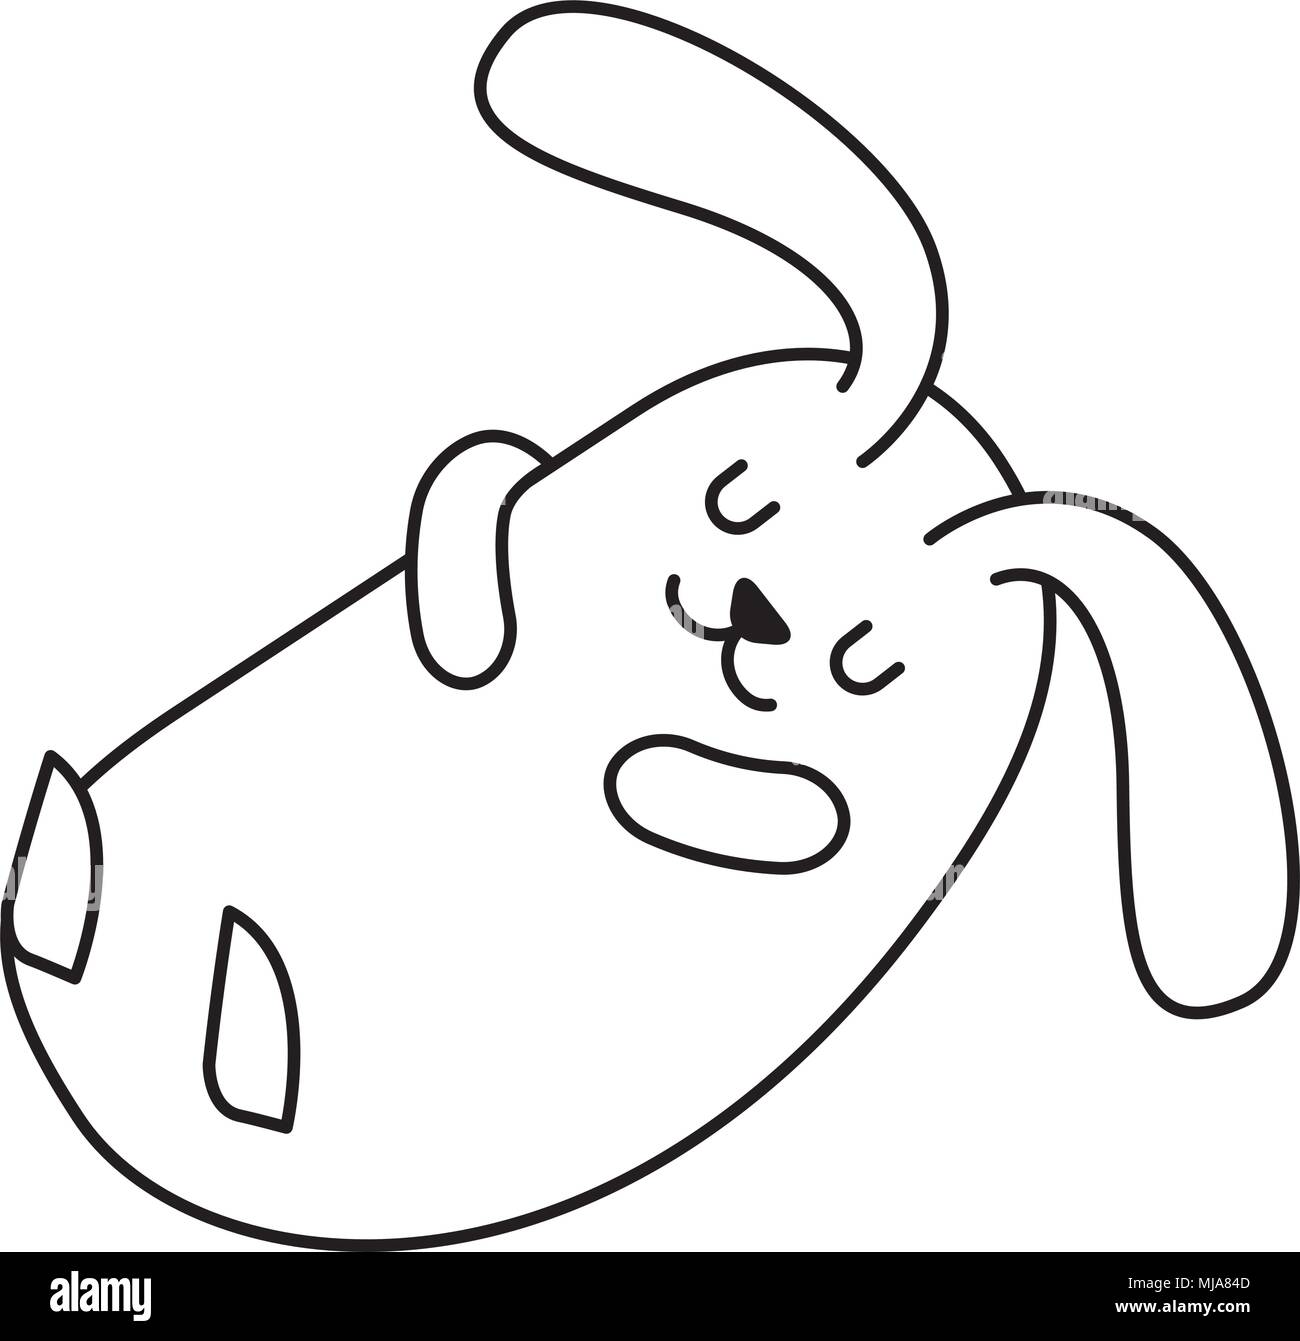 Cartoon resting bunny isolated illustration Stock Vector Images